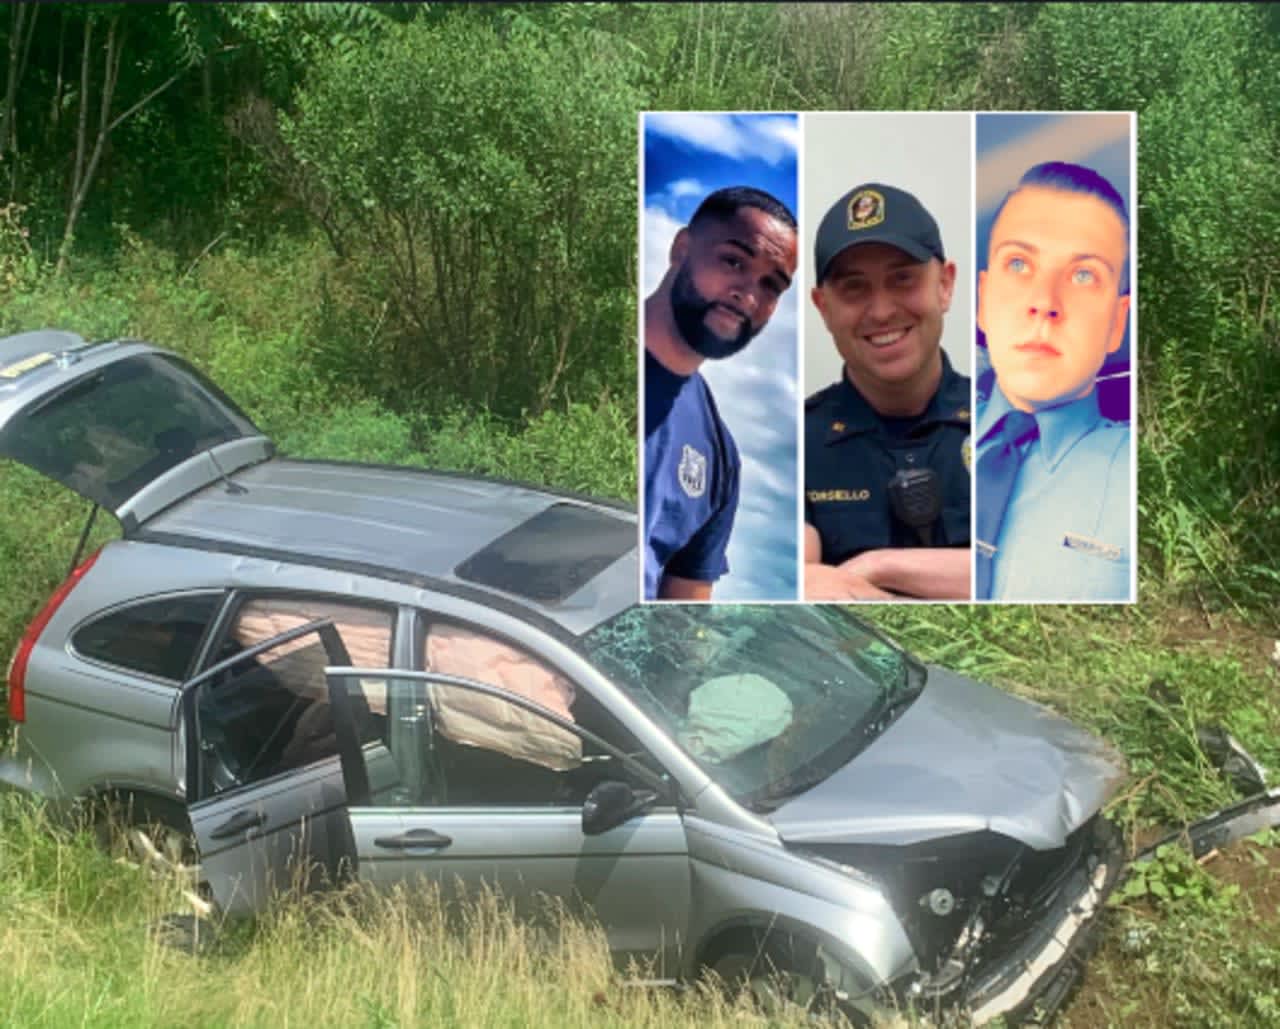 Wood-Ridge firefighter Dan O'Beirne, Rutherford volunteer EMT Walter Rogers, Wood-Ridge Police Officer Mark Torsiello and NJ corrections officer Chris Aurajo (not pictured) rescued three women trapped in a vehicles on the NJ Turnpike.